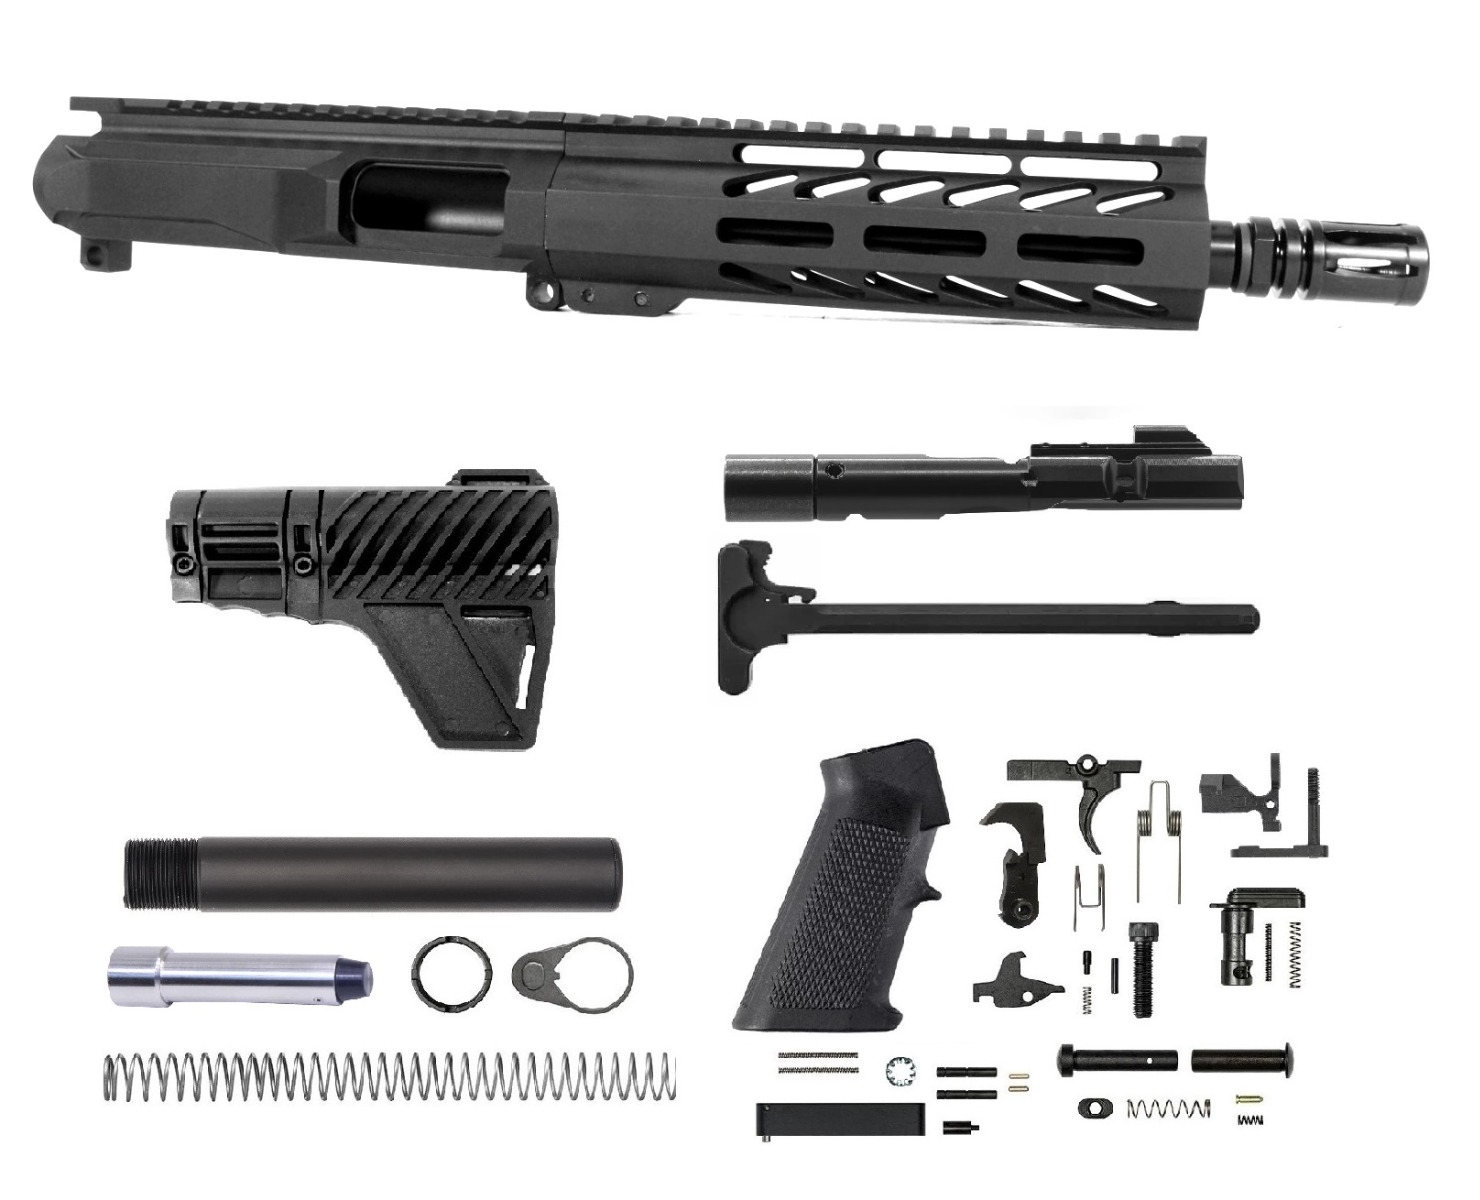 8.5 inch 40 S&W AR-15 Upper Kit | In Stock | Fast Shipping